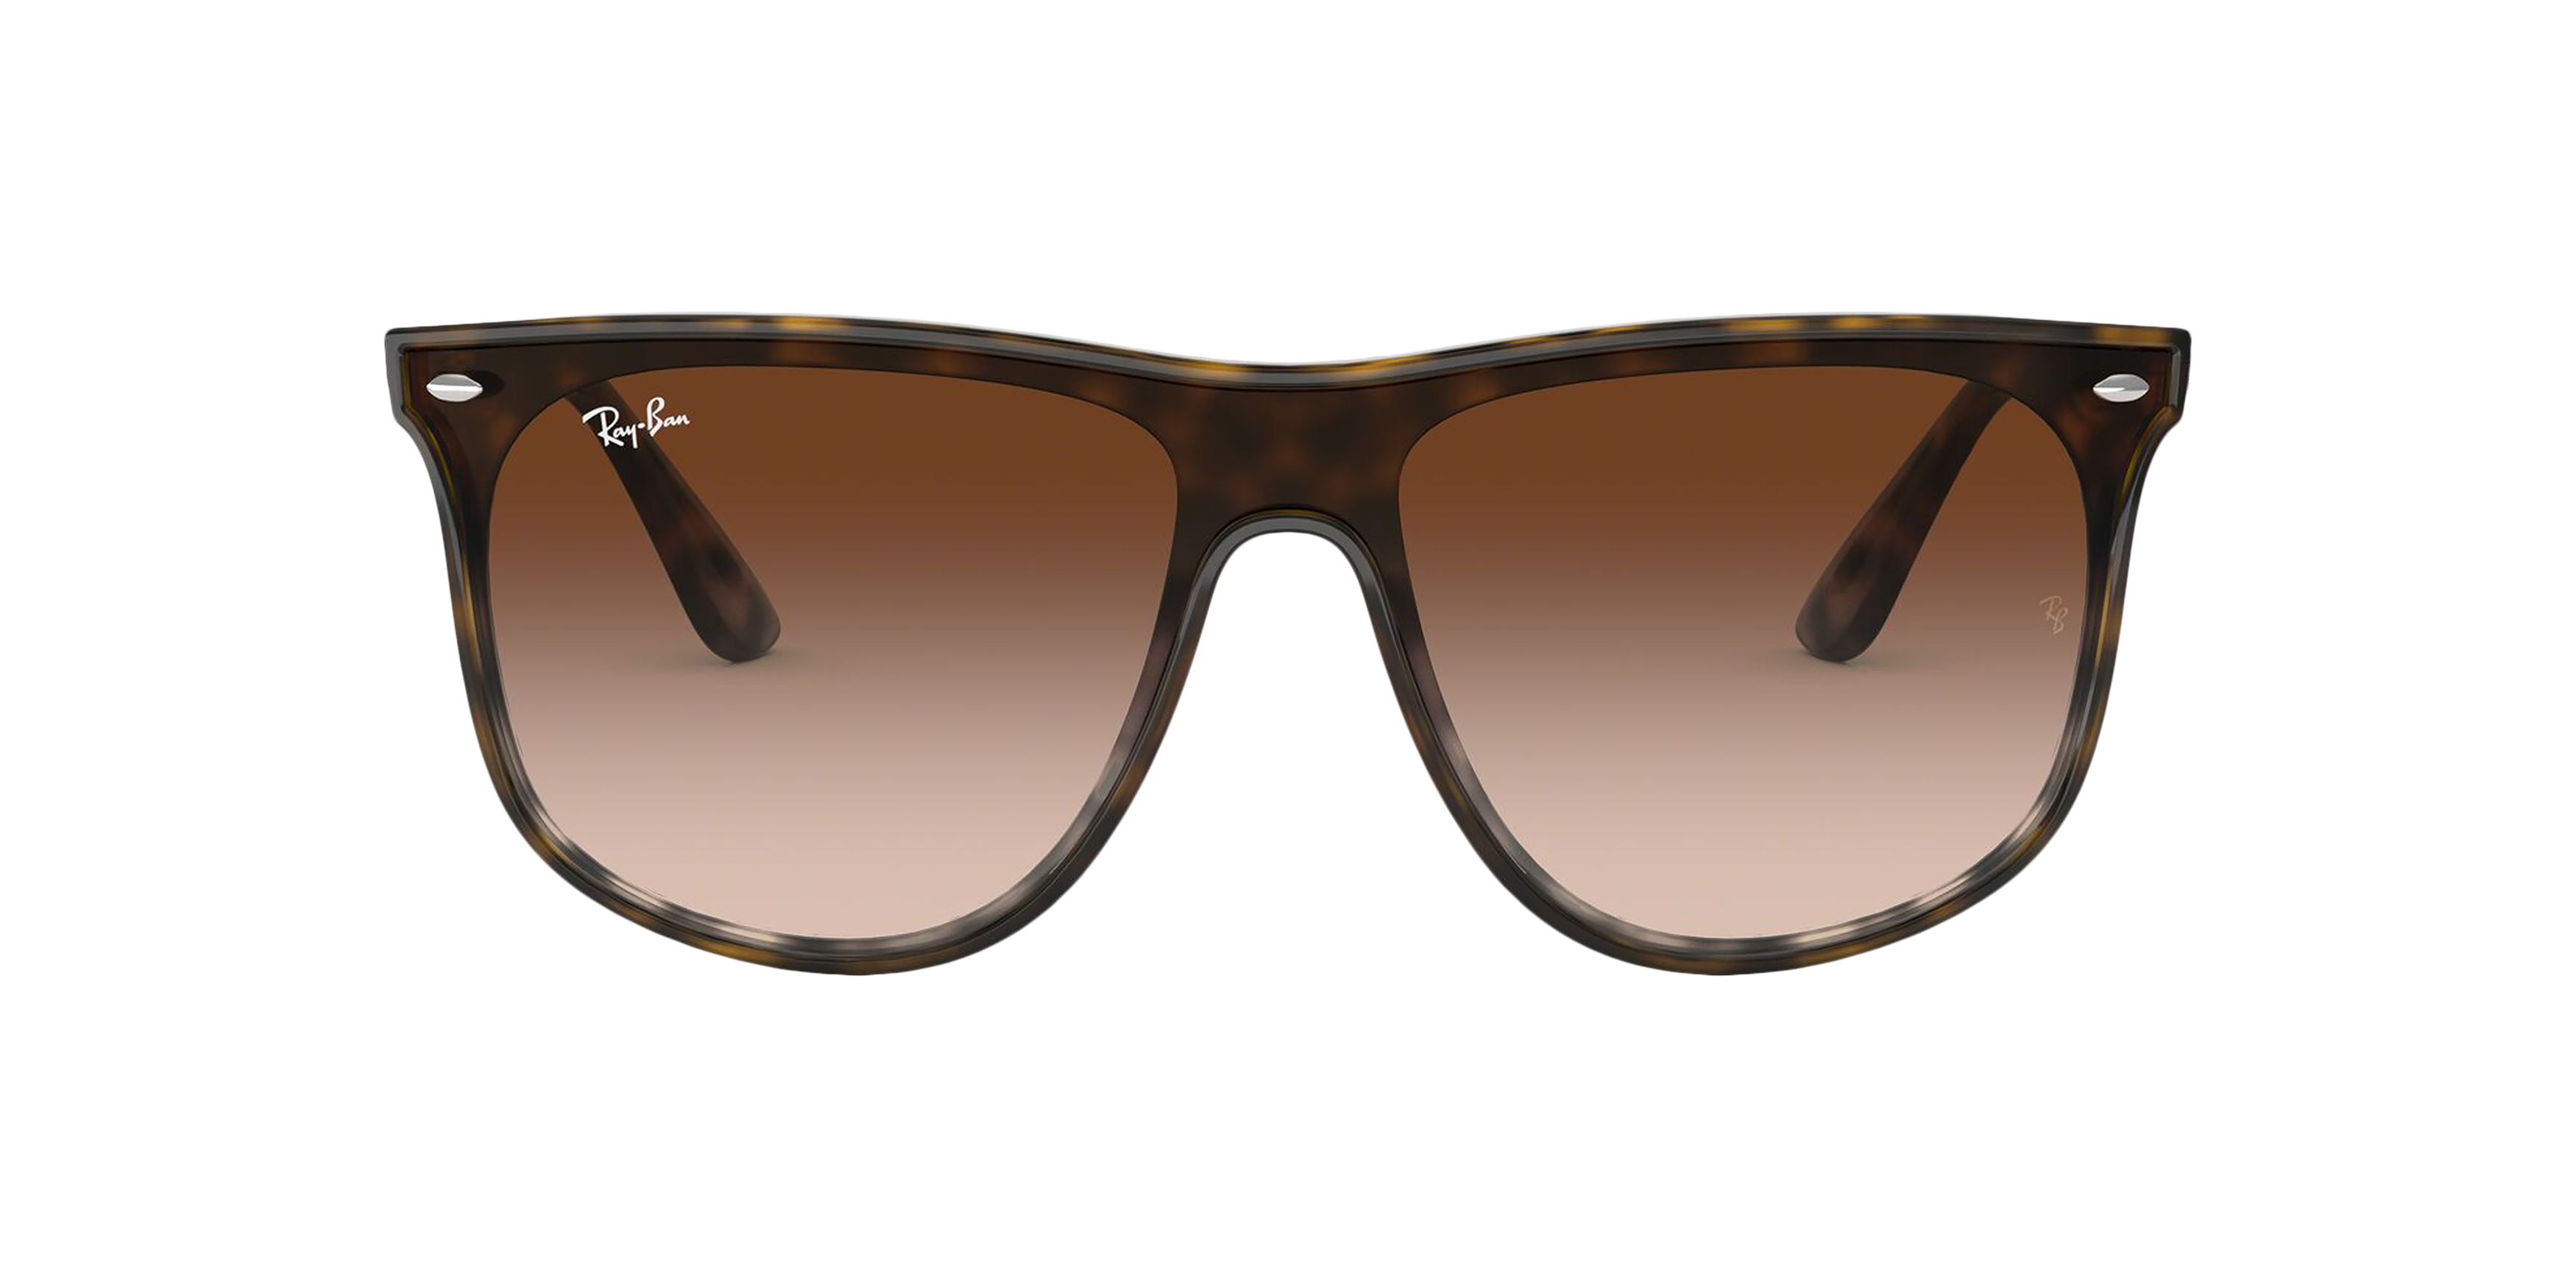 [products.image.front] Ray-Ban Blaze RB4447N 710/13